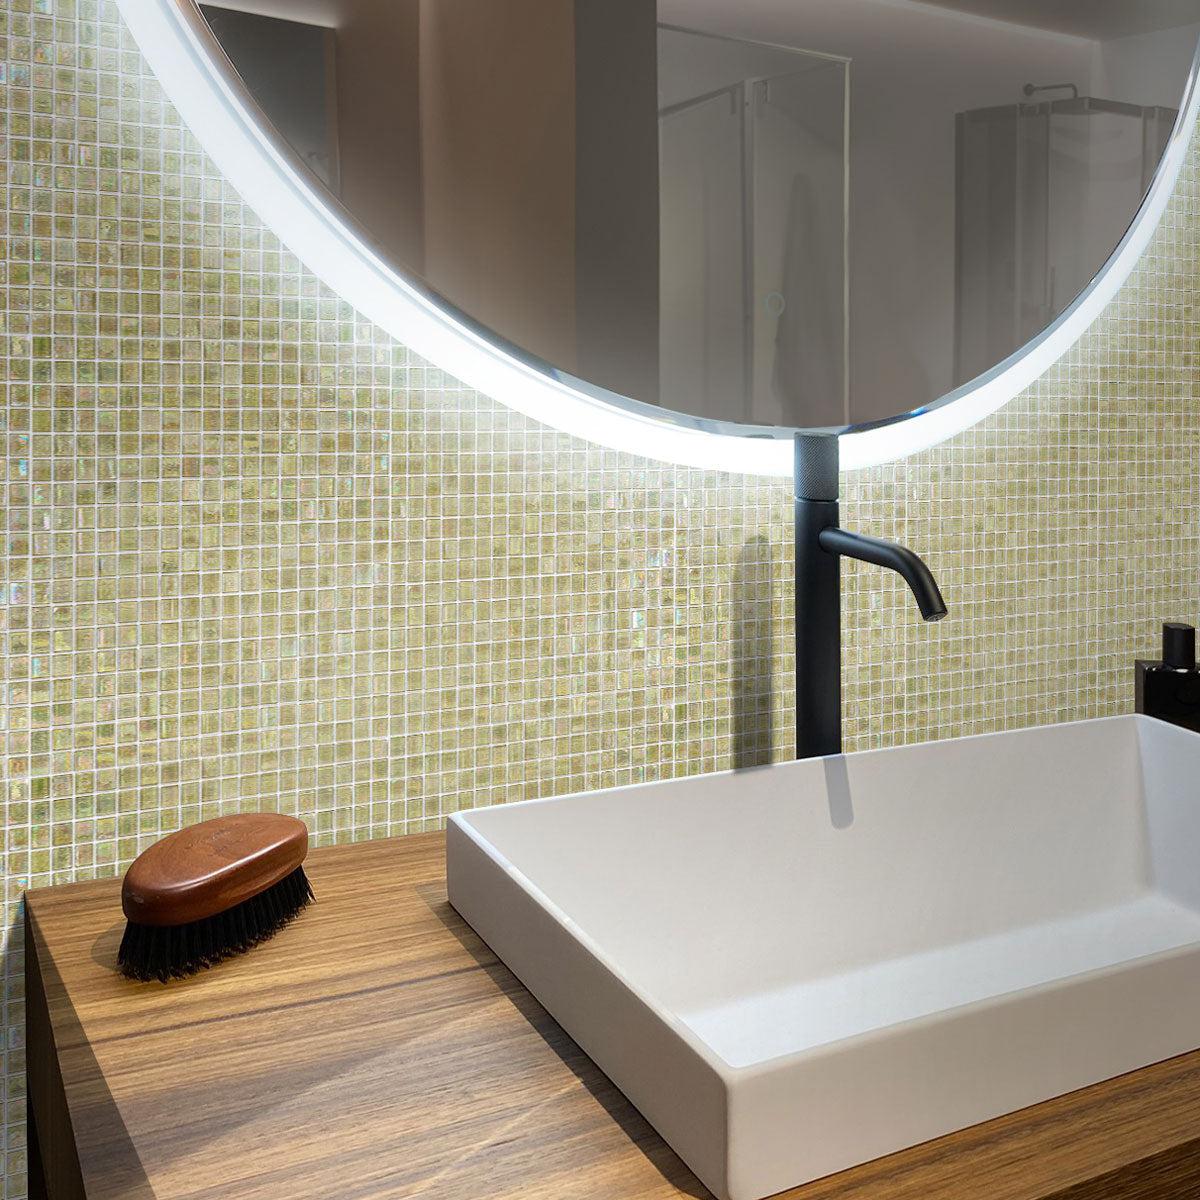 The luxurious bathroom is decorated with Iridescent Yellow Gold Squares Glass Tile